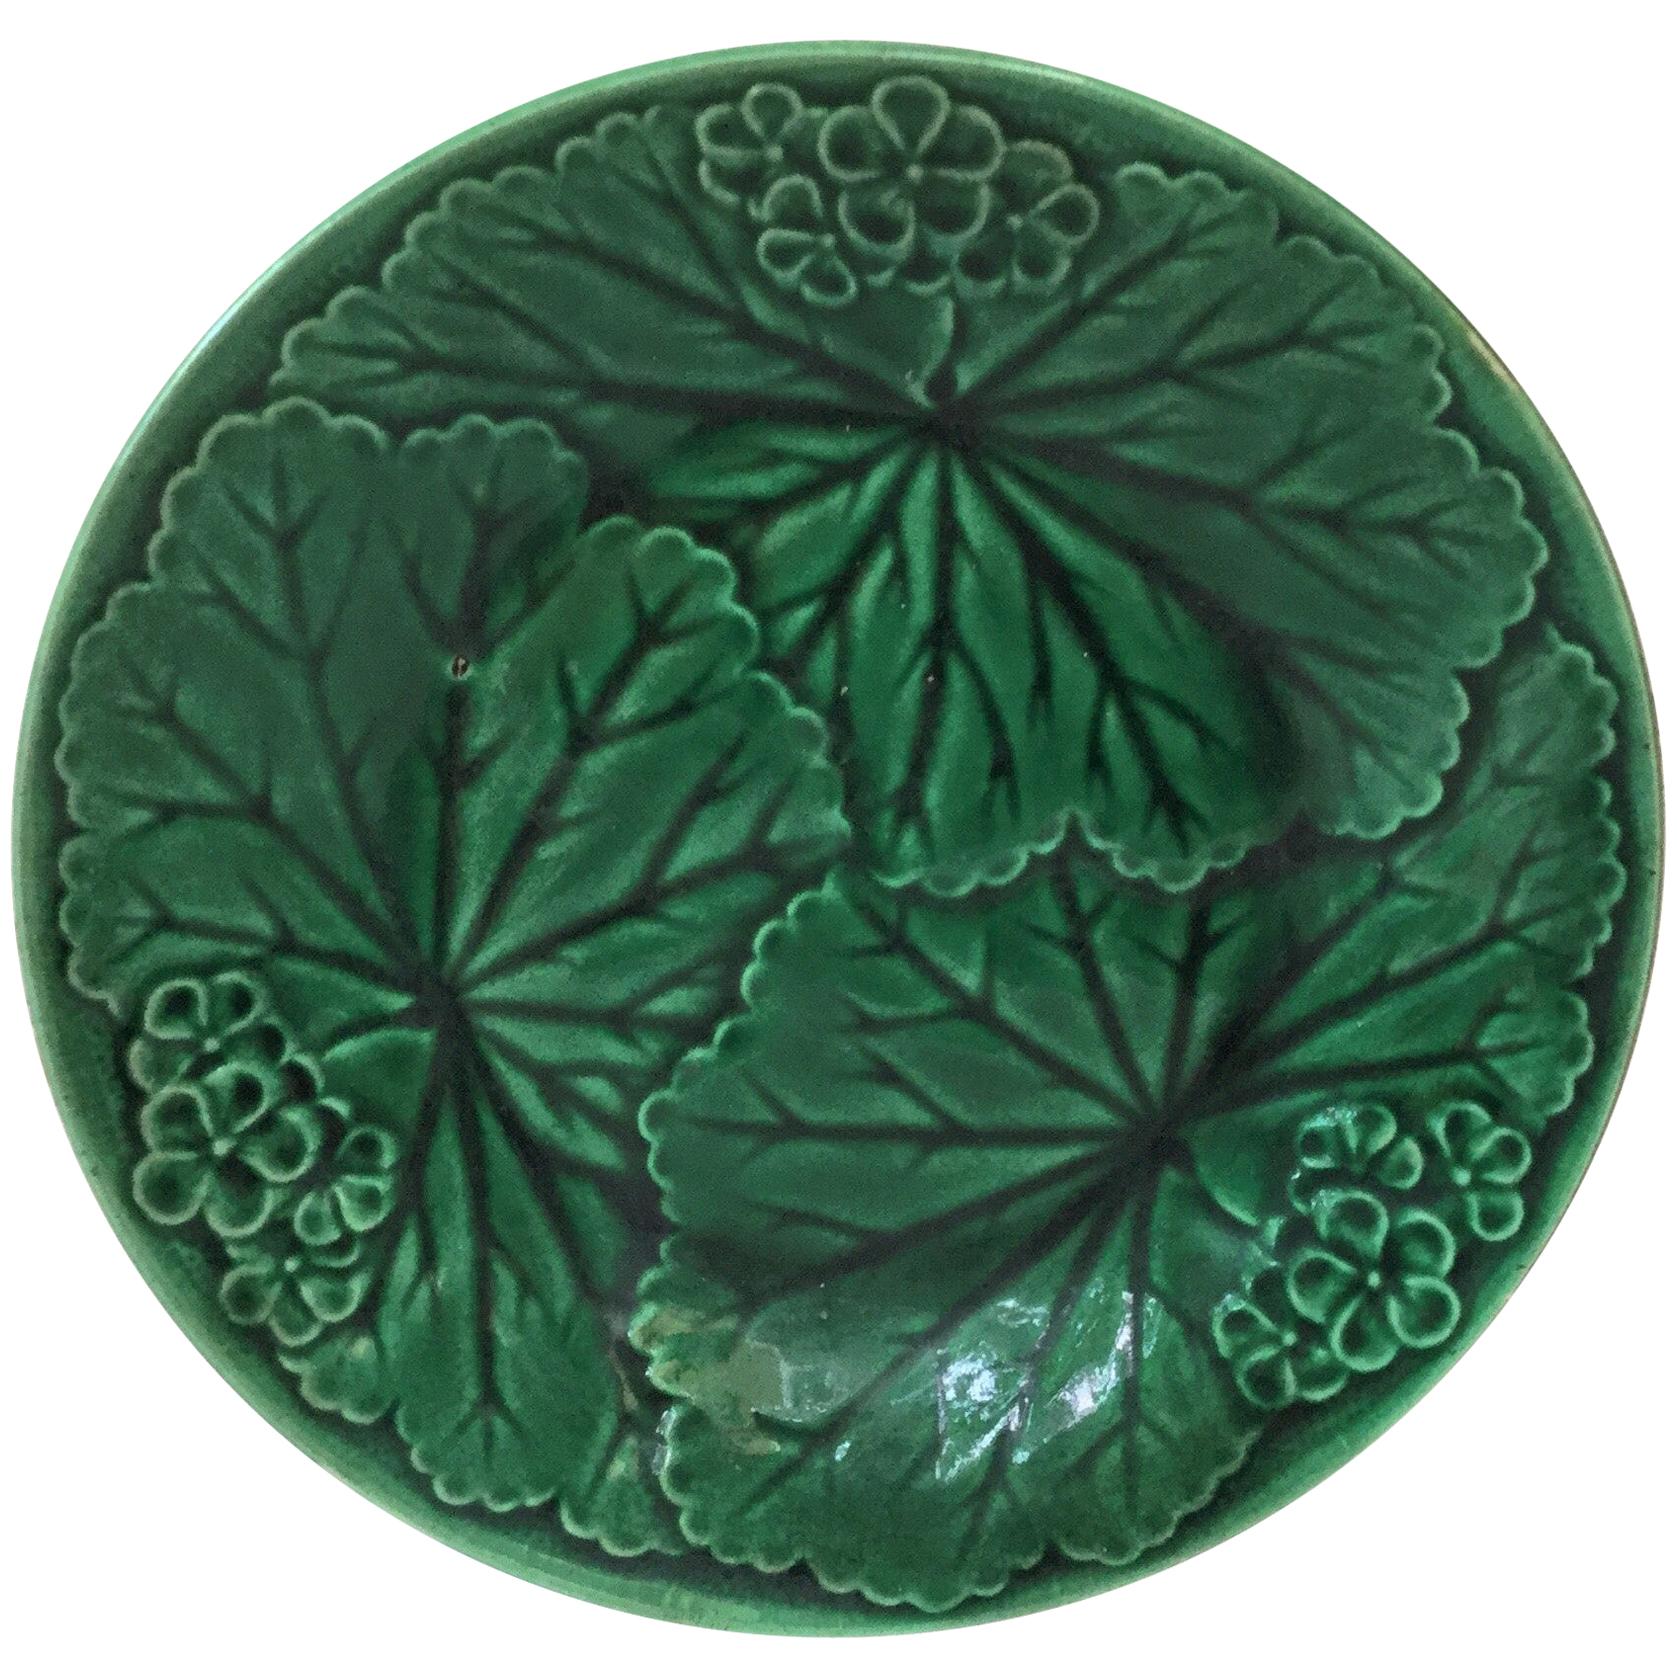 Green Majolica Plate Clairefontaine, circa 1890